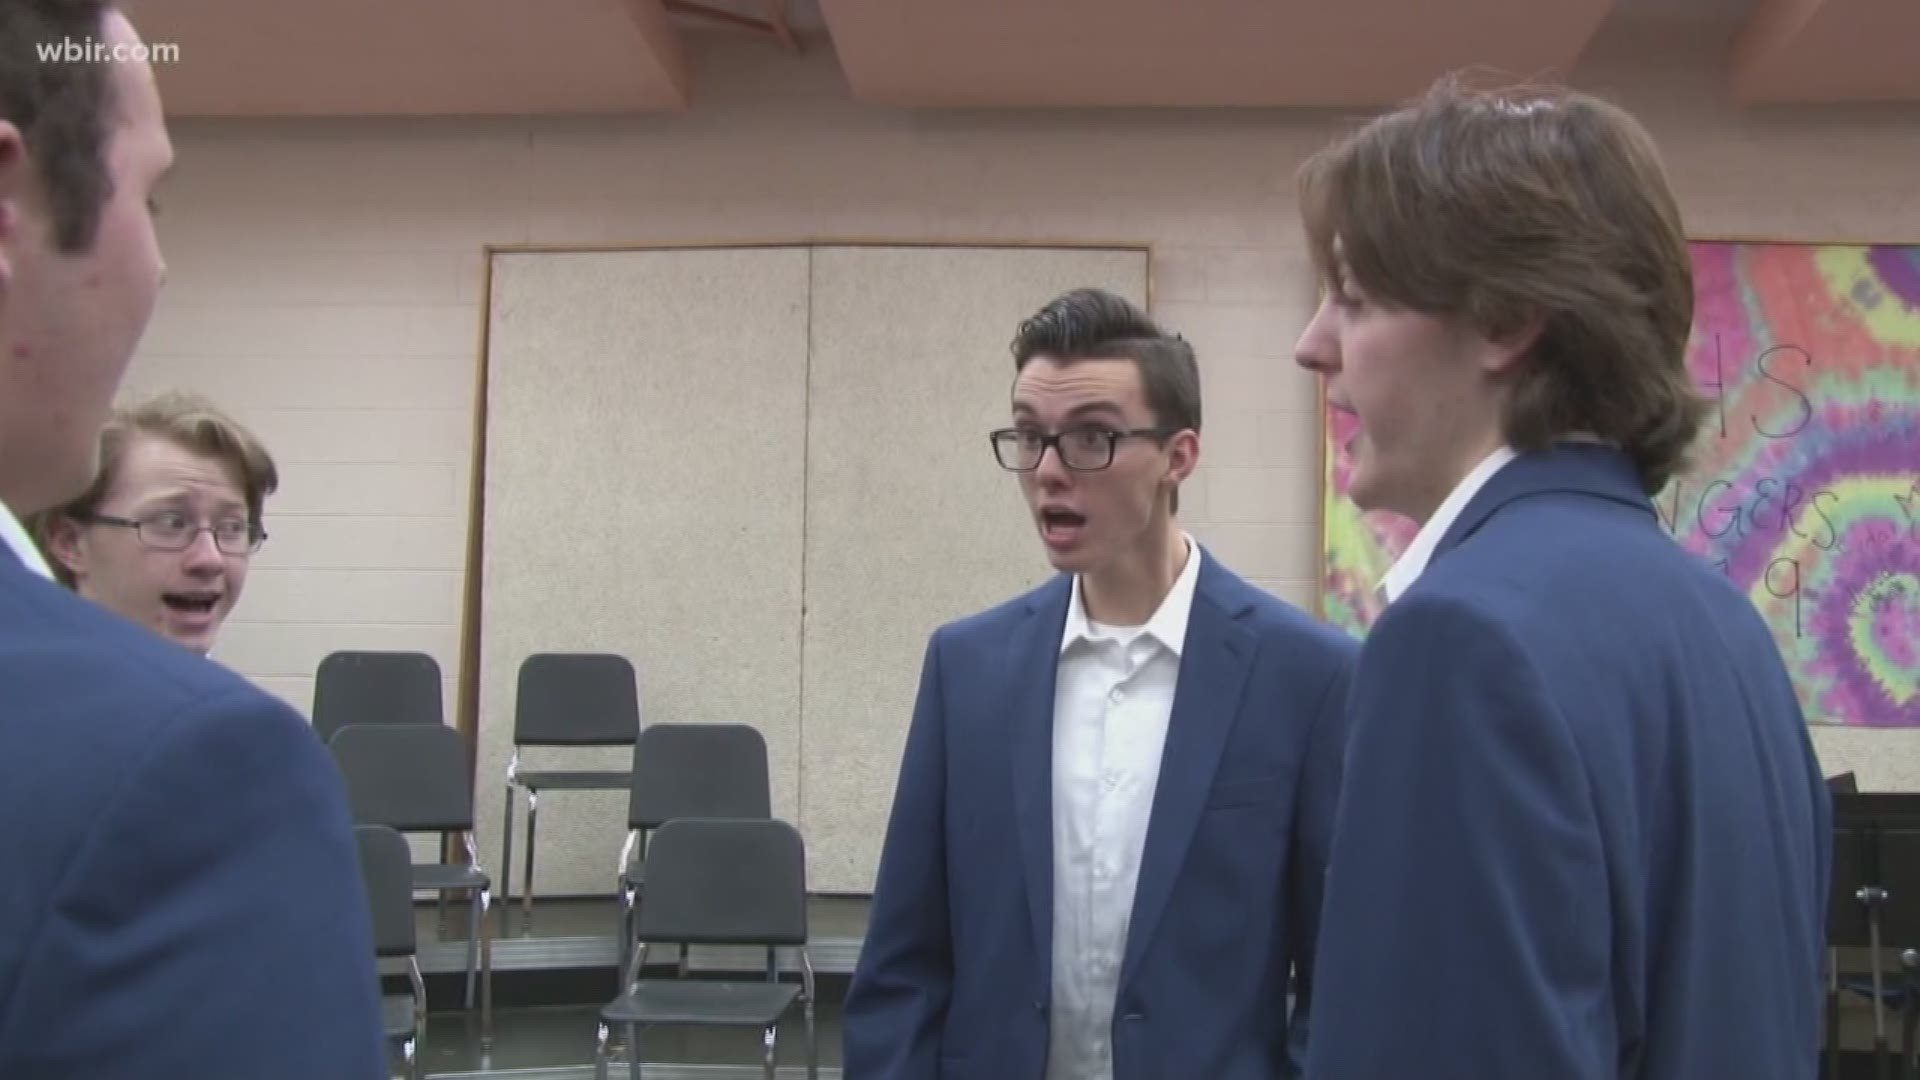 A Powell High School singing group is getting national recognition.